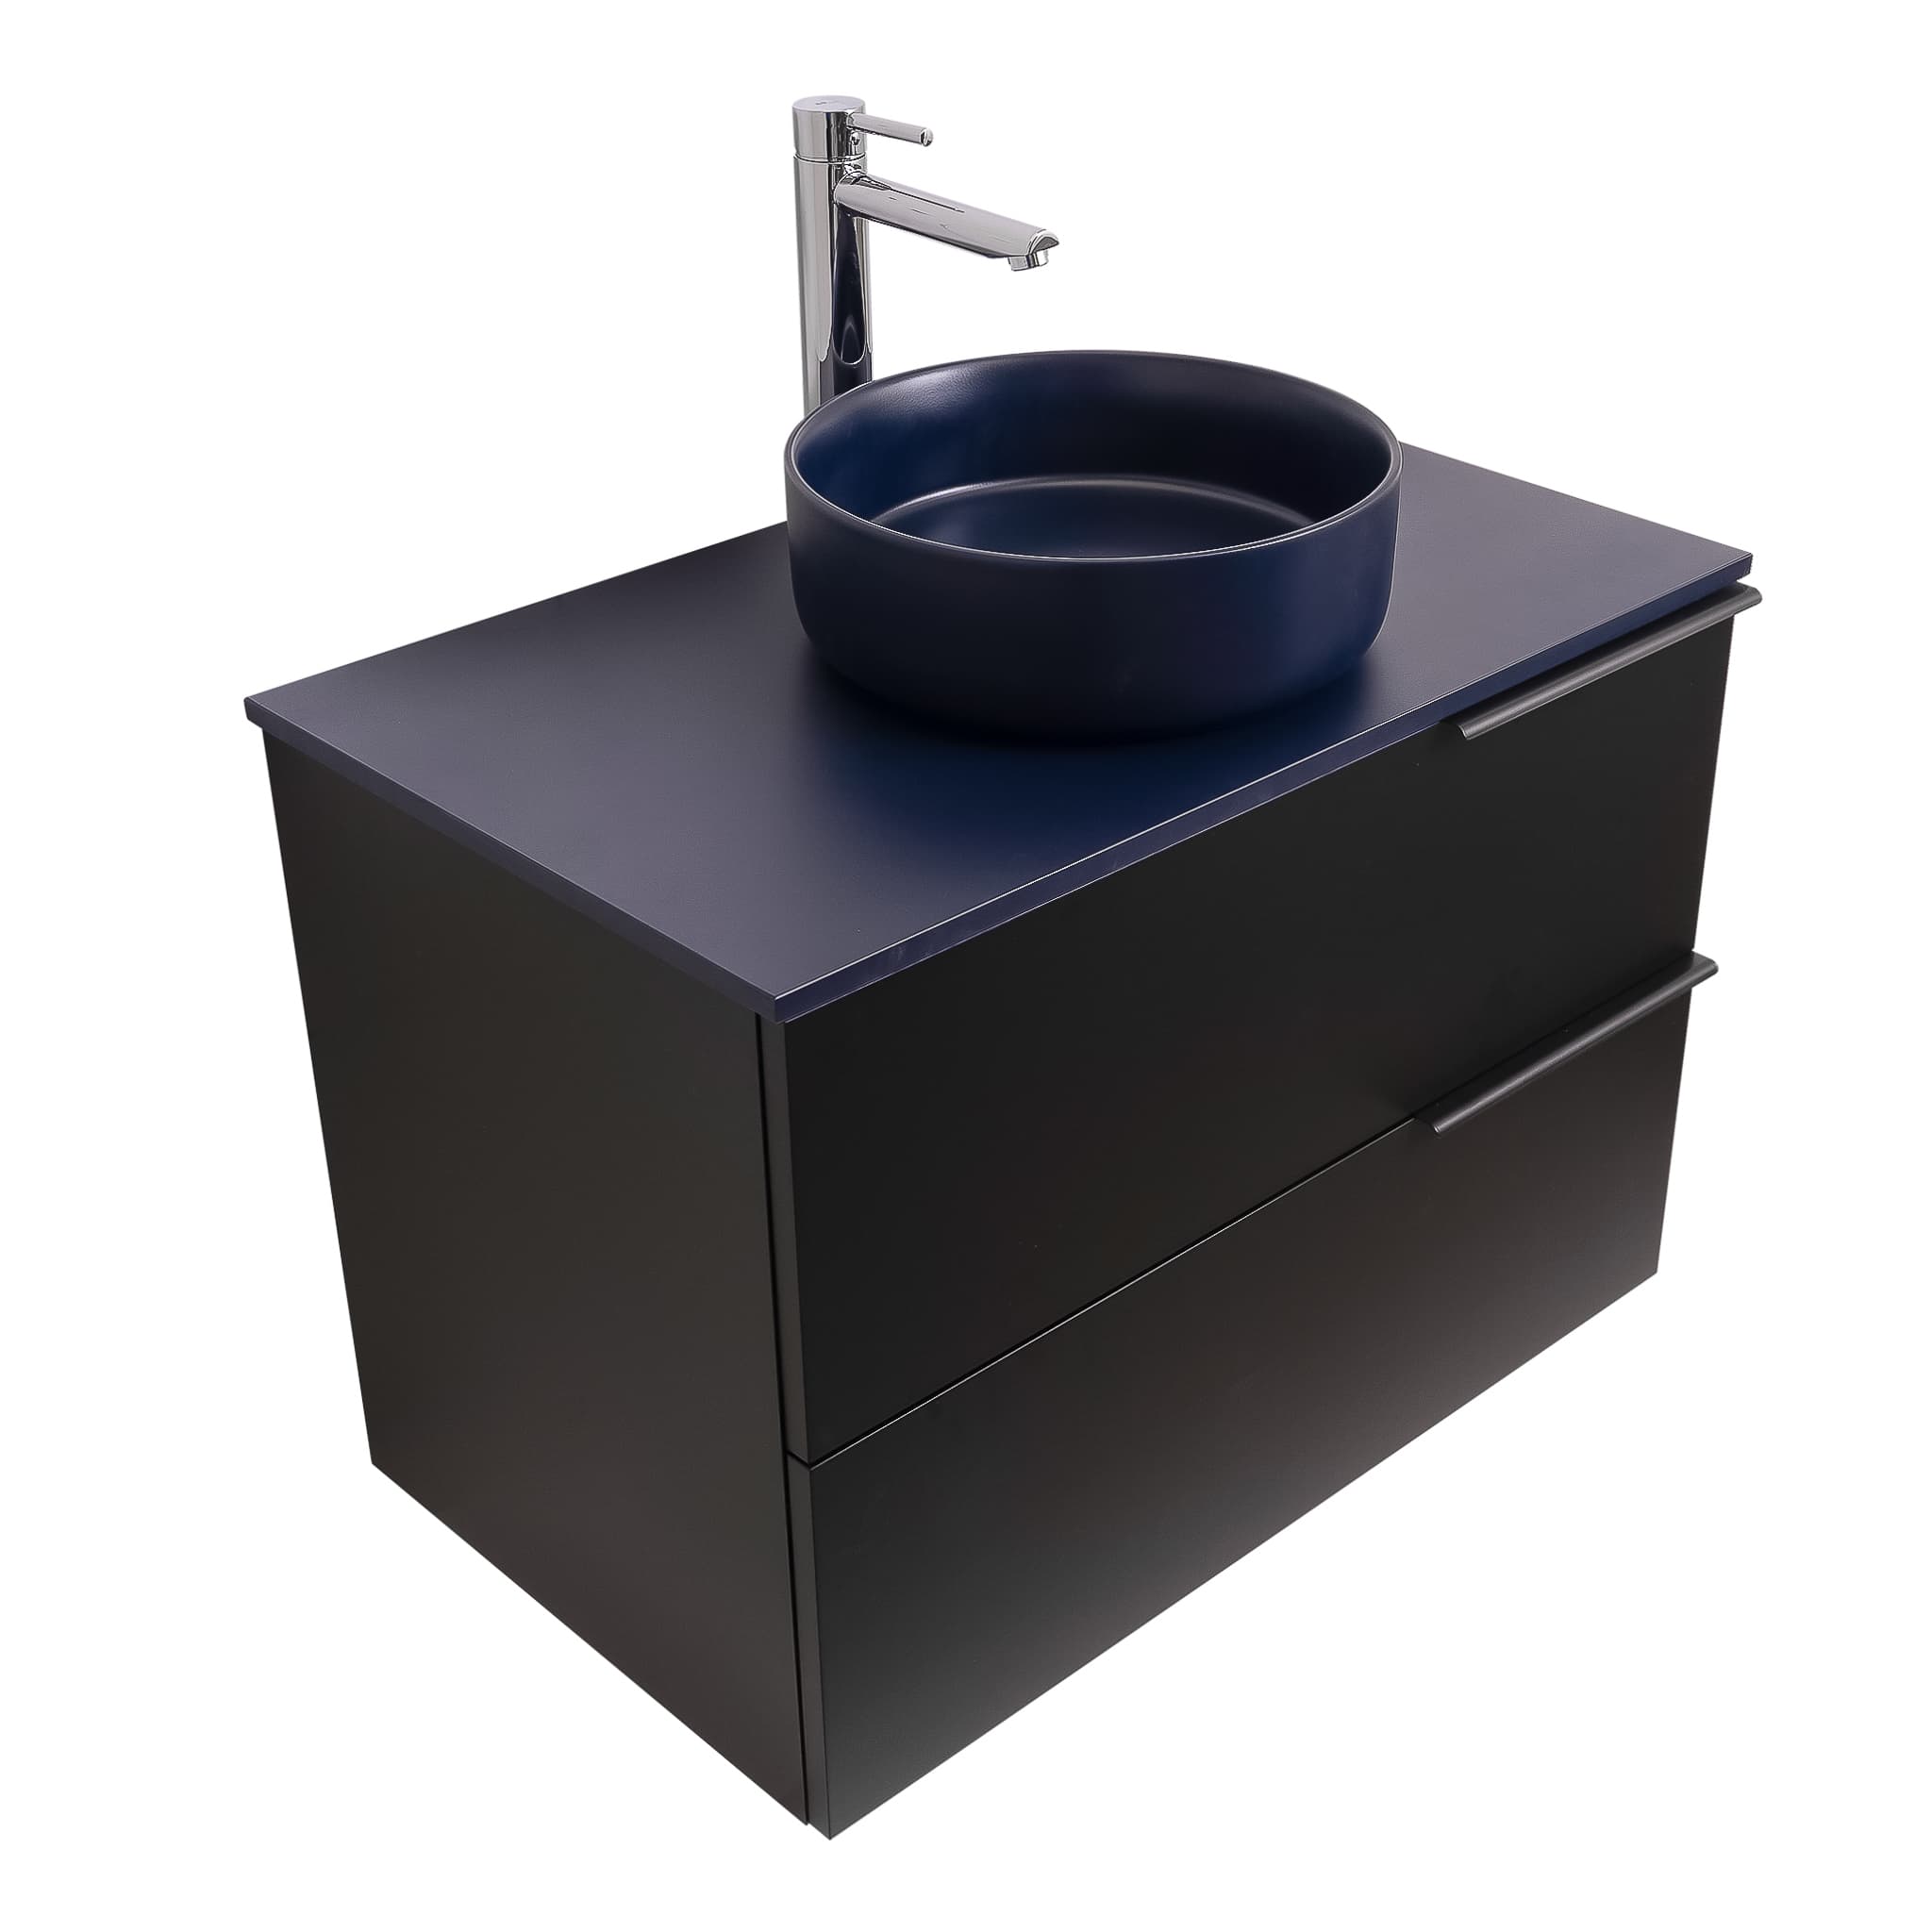 Mallorca 31.5 Matte Black Cabinet, Ares Navy Blue Top And Ares Navy Blue Ceramic Basin, Wall Mounted Modern Vanity Set